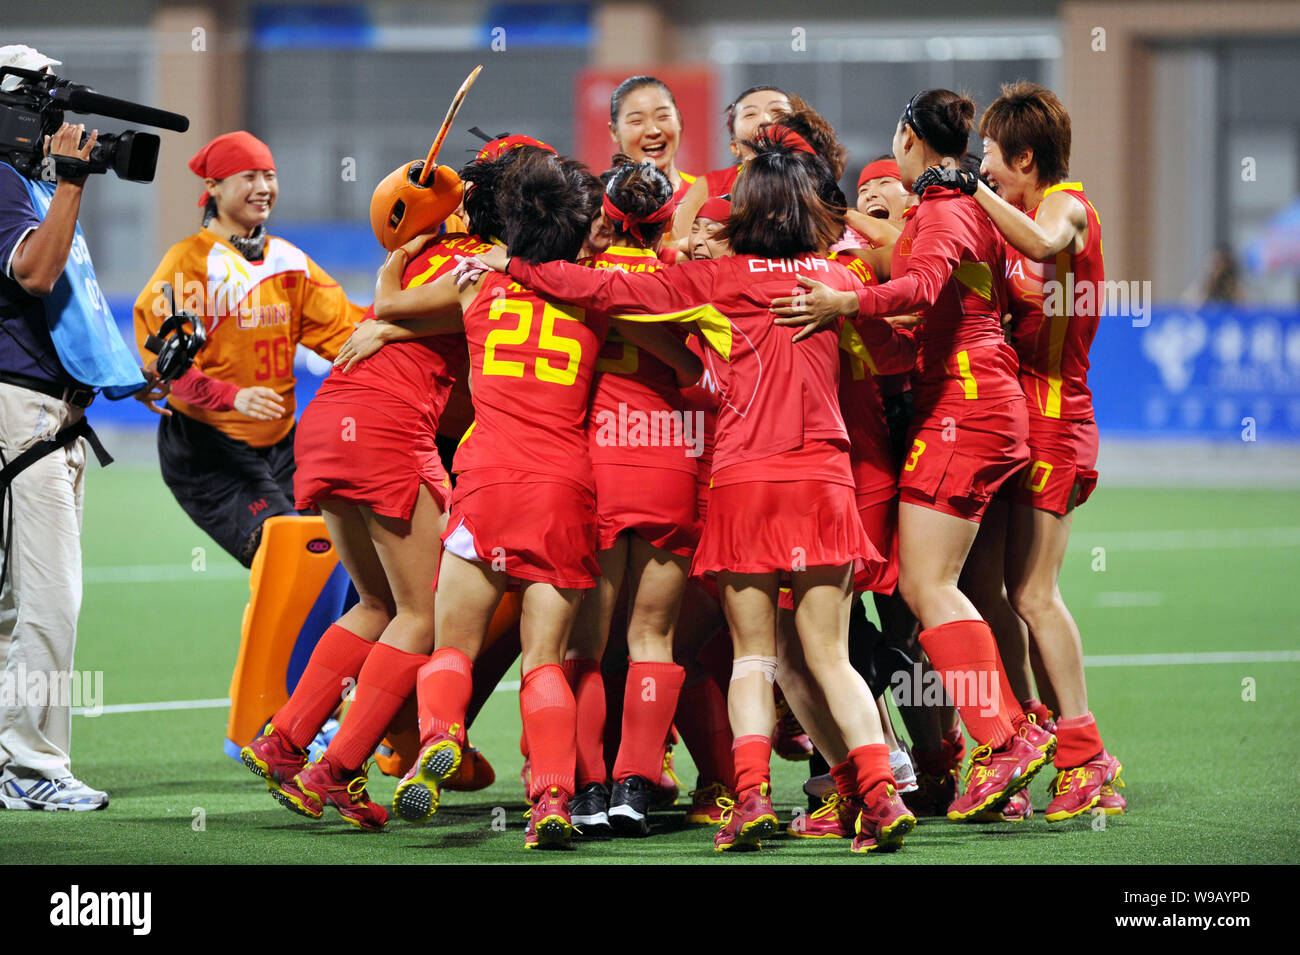 Team of China celebrates the victory over South Korea in the womens field hockey finals at the 16th Asian Games in Guangzhou city, south Chinas Guangd Stock Photo